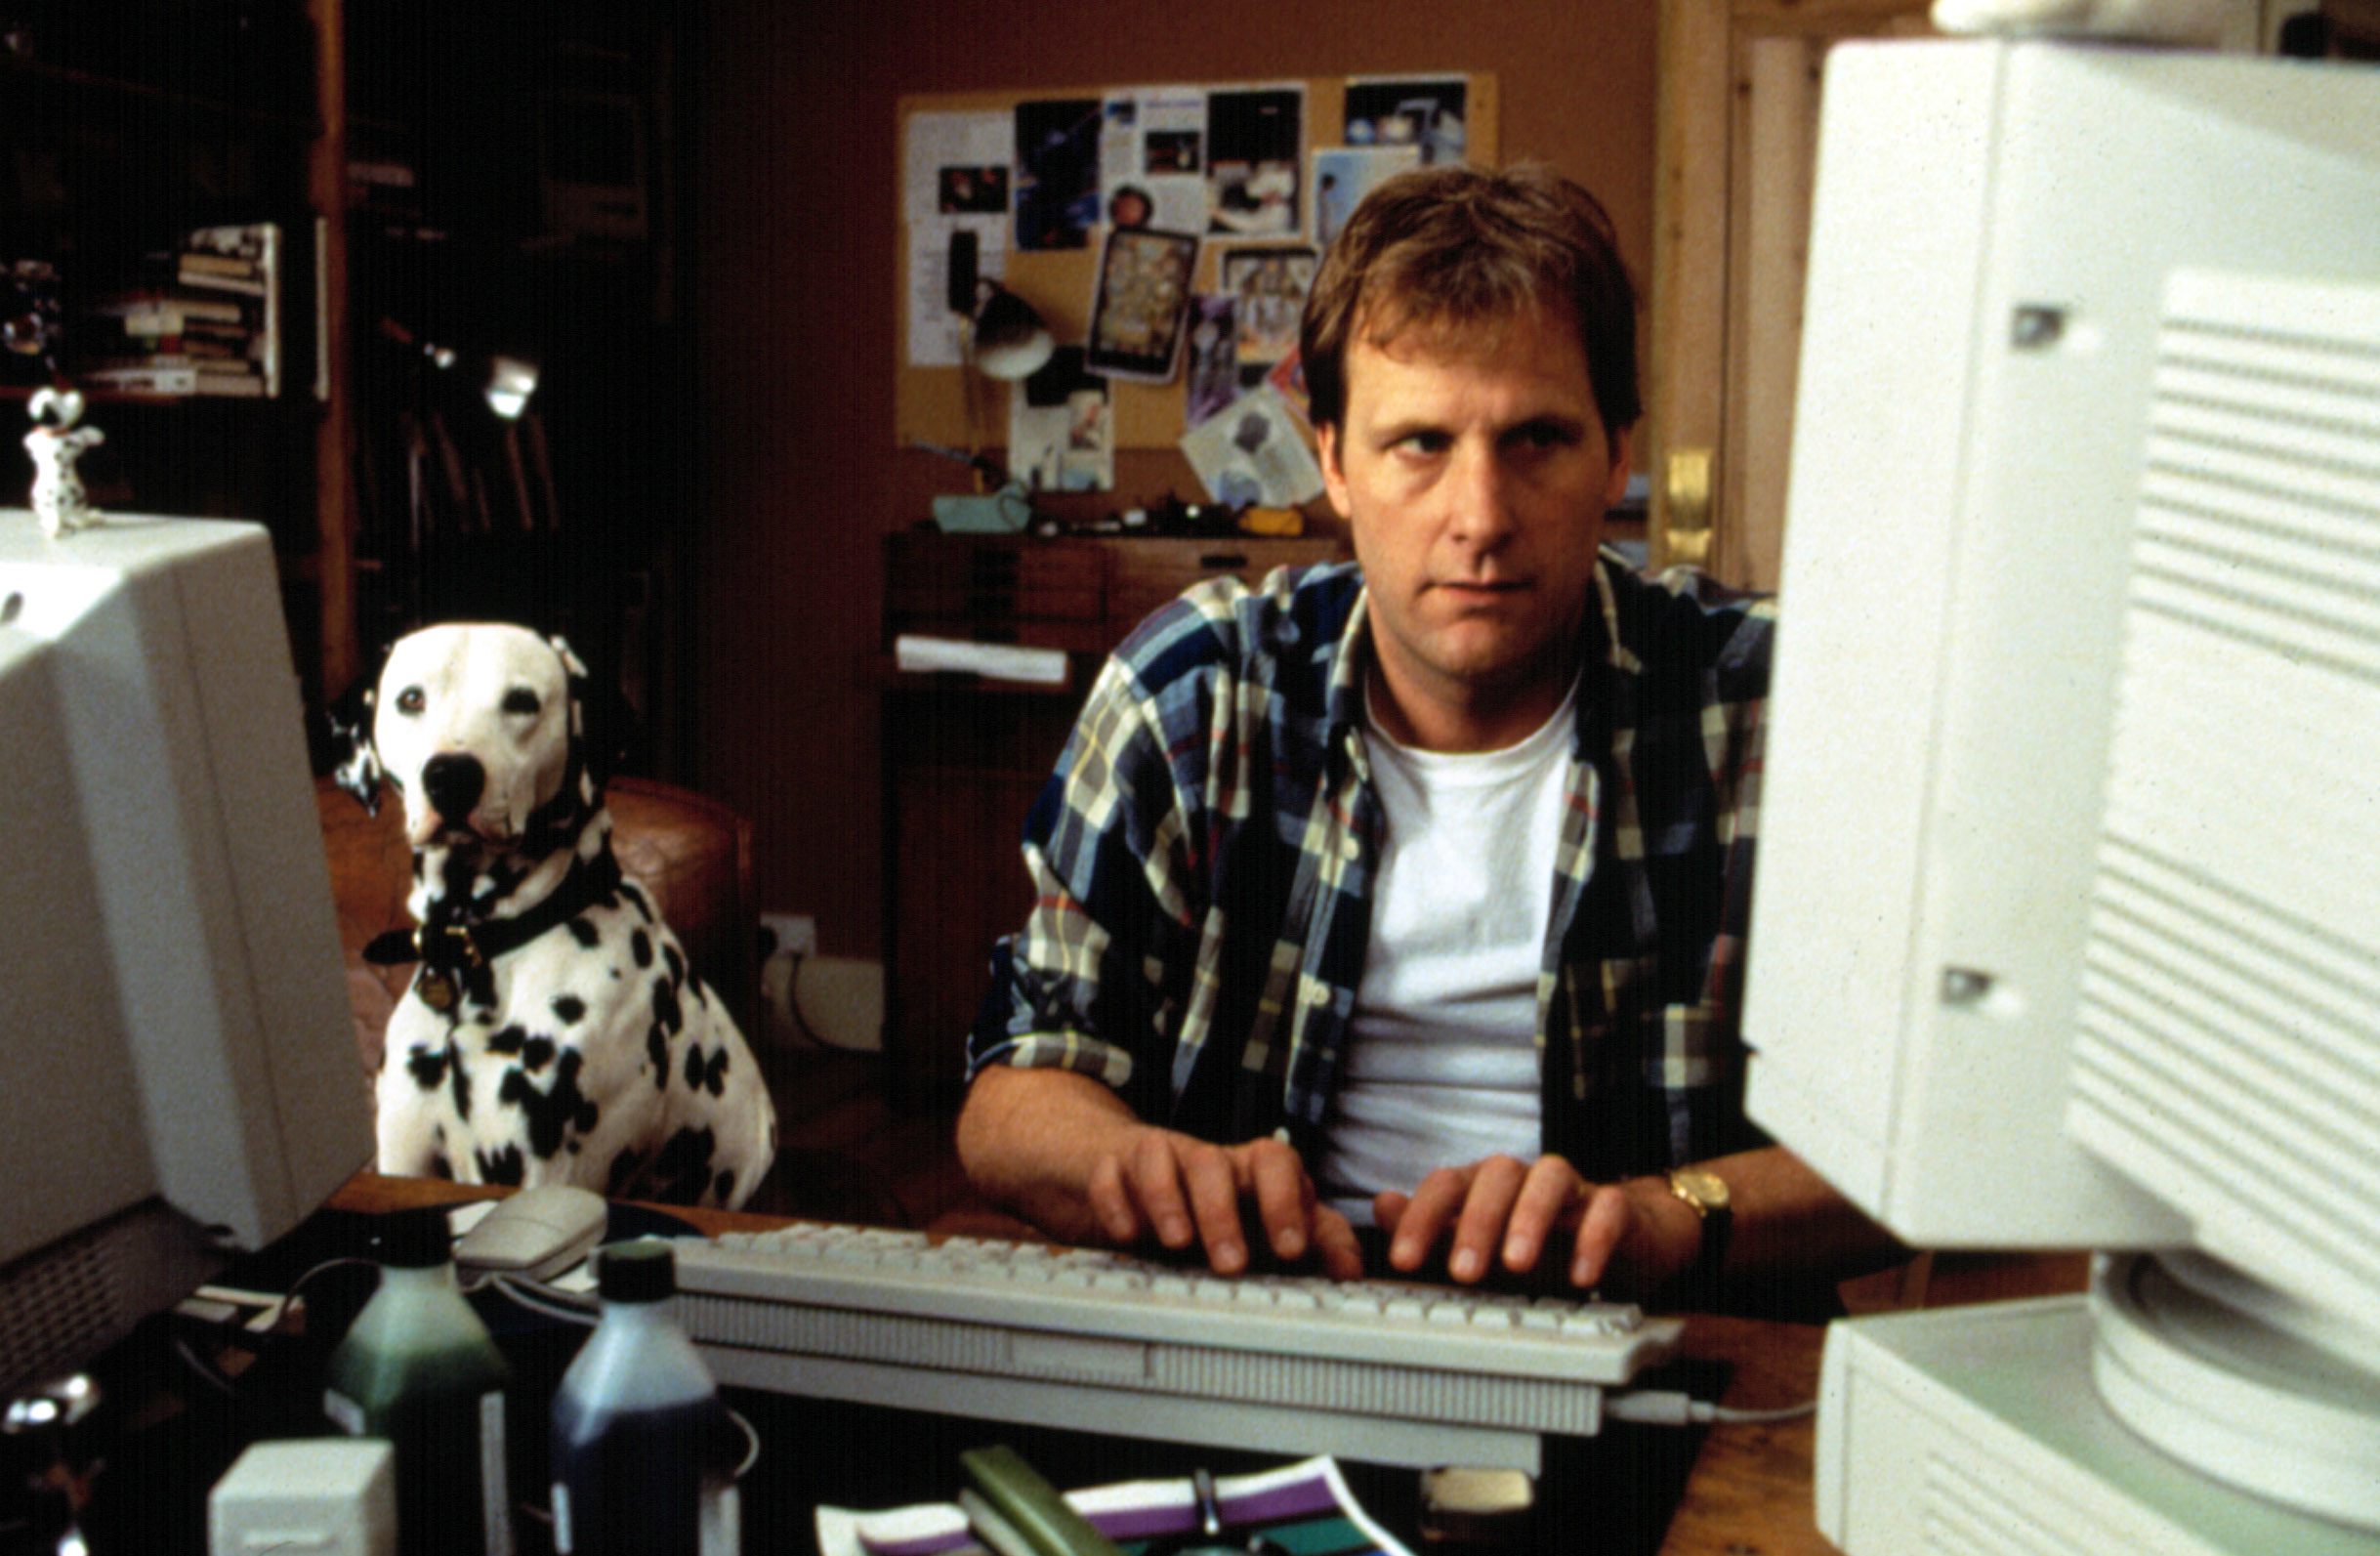 Jeff Daniels on the computer next to a dalmatian